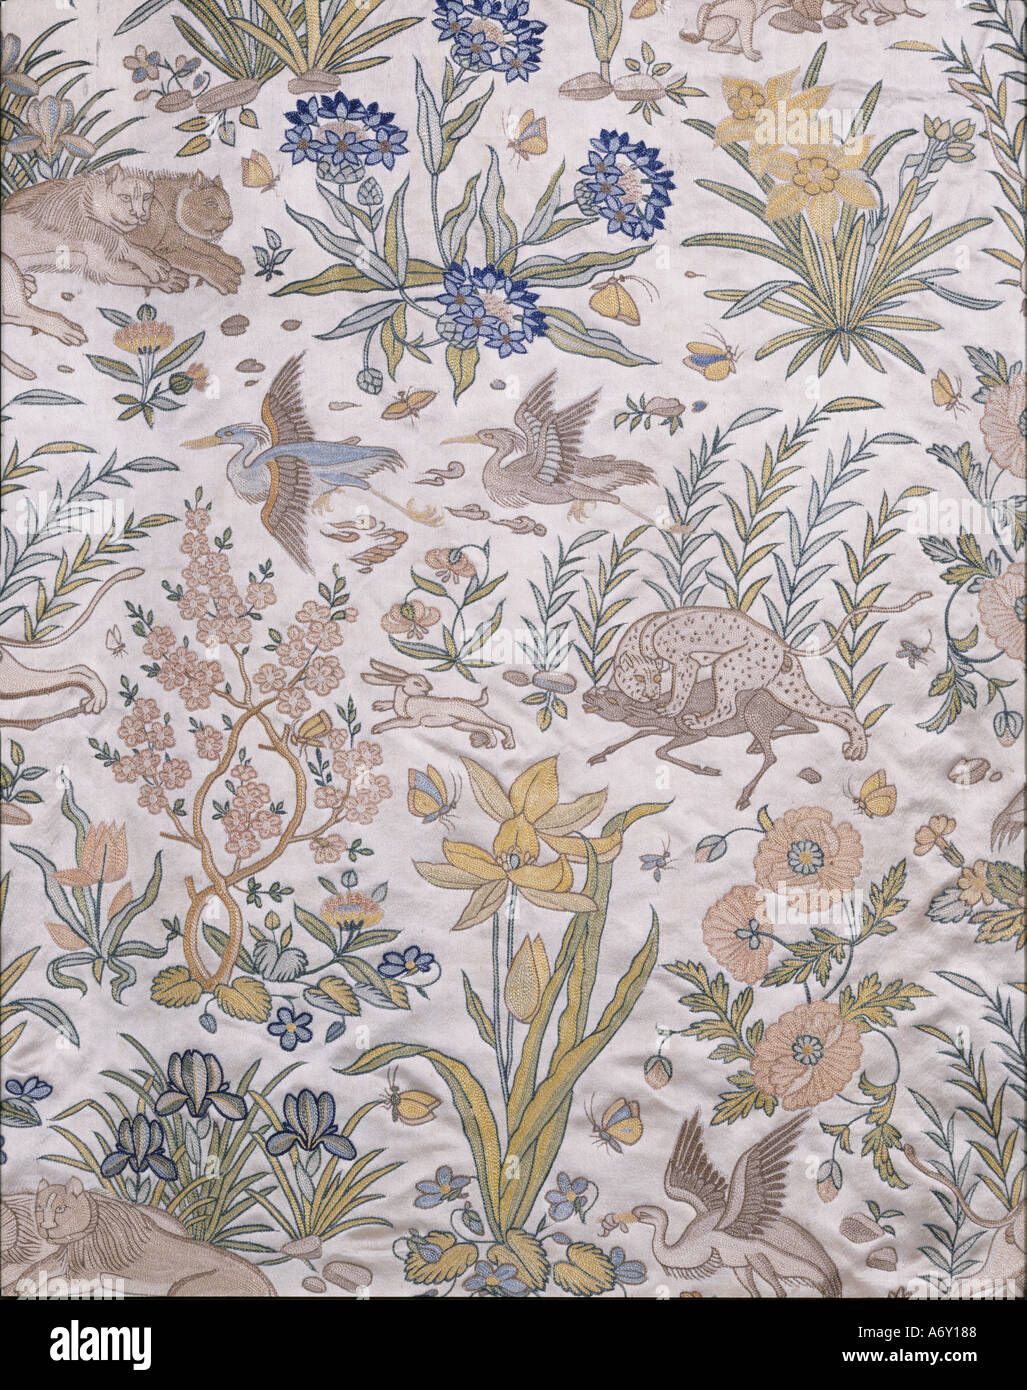 Fabric for hunting coat. Mughal, India, early 17th century. Stock Photo